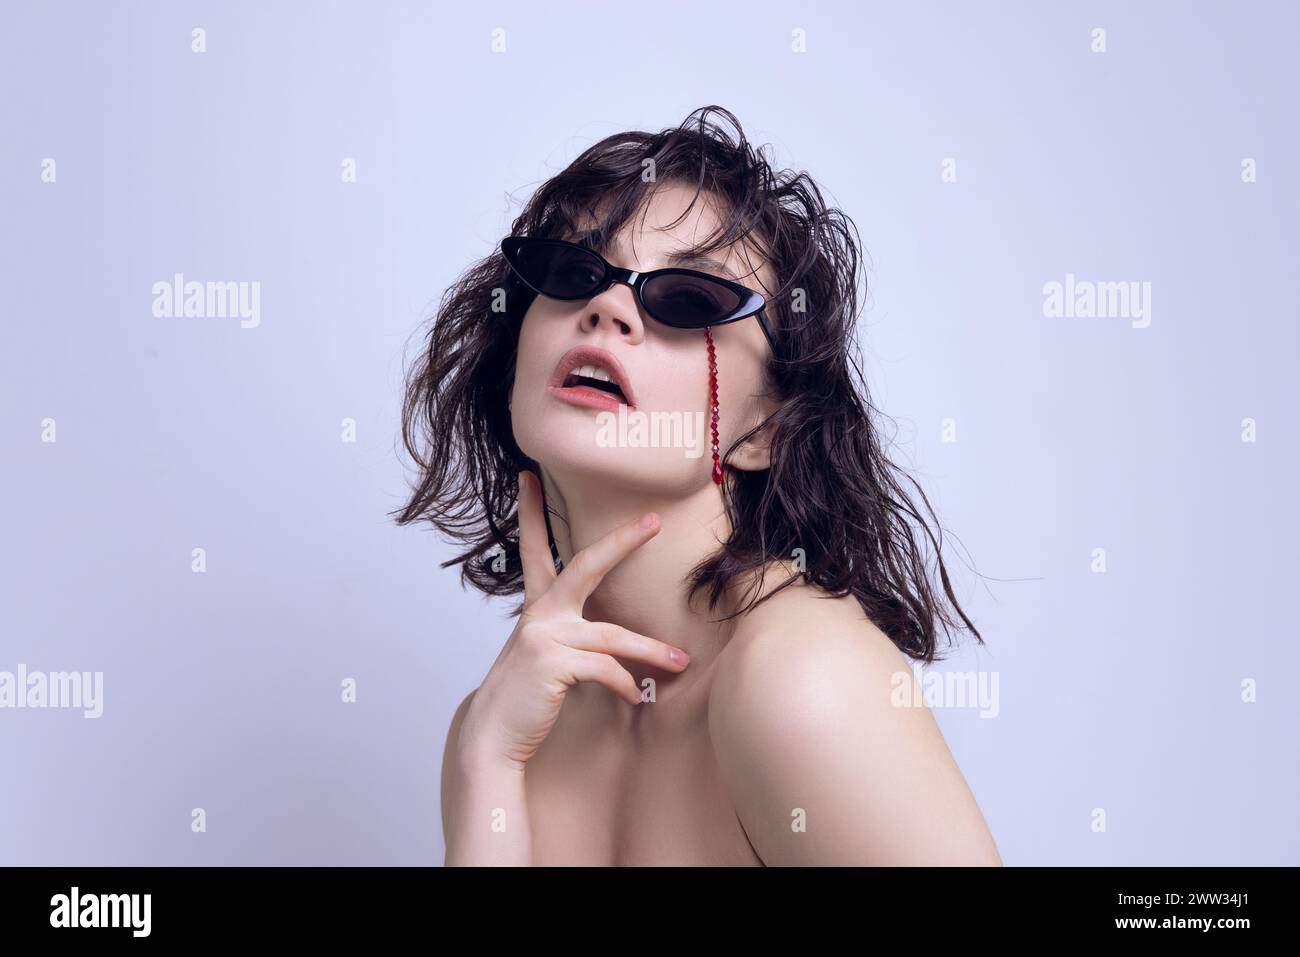 Beautiful young woman with wet hair wearing sunglasses, red beads draped over face. Emerging fashion trends. Stock Photo